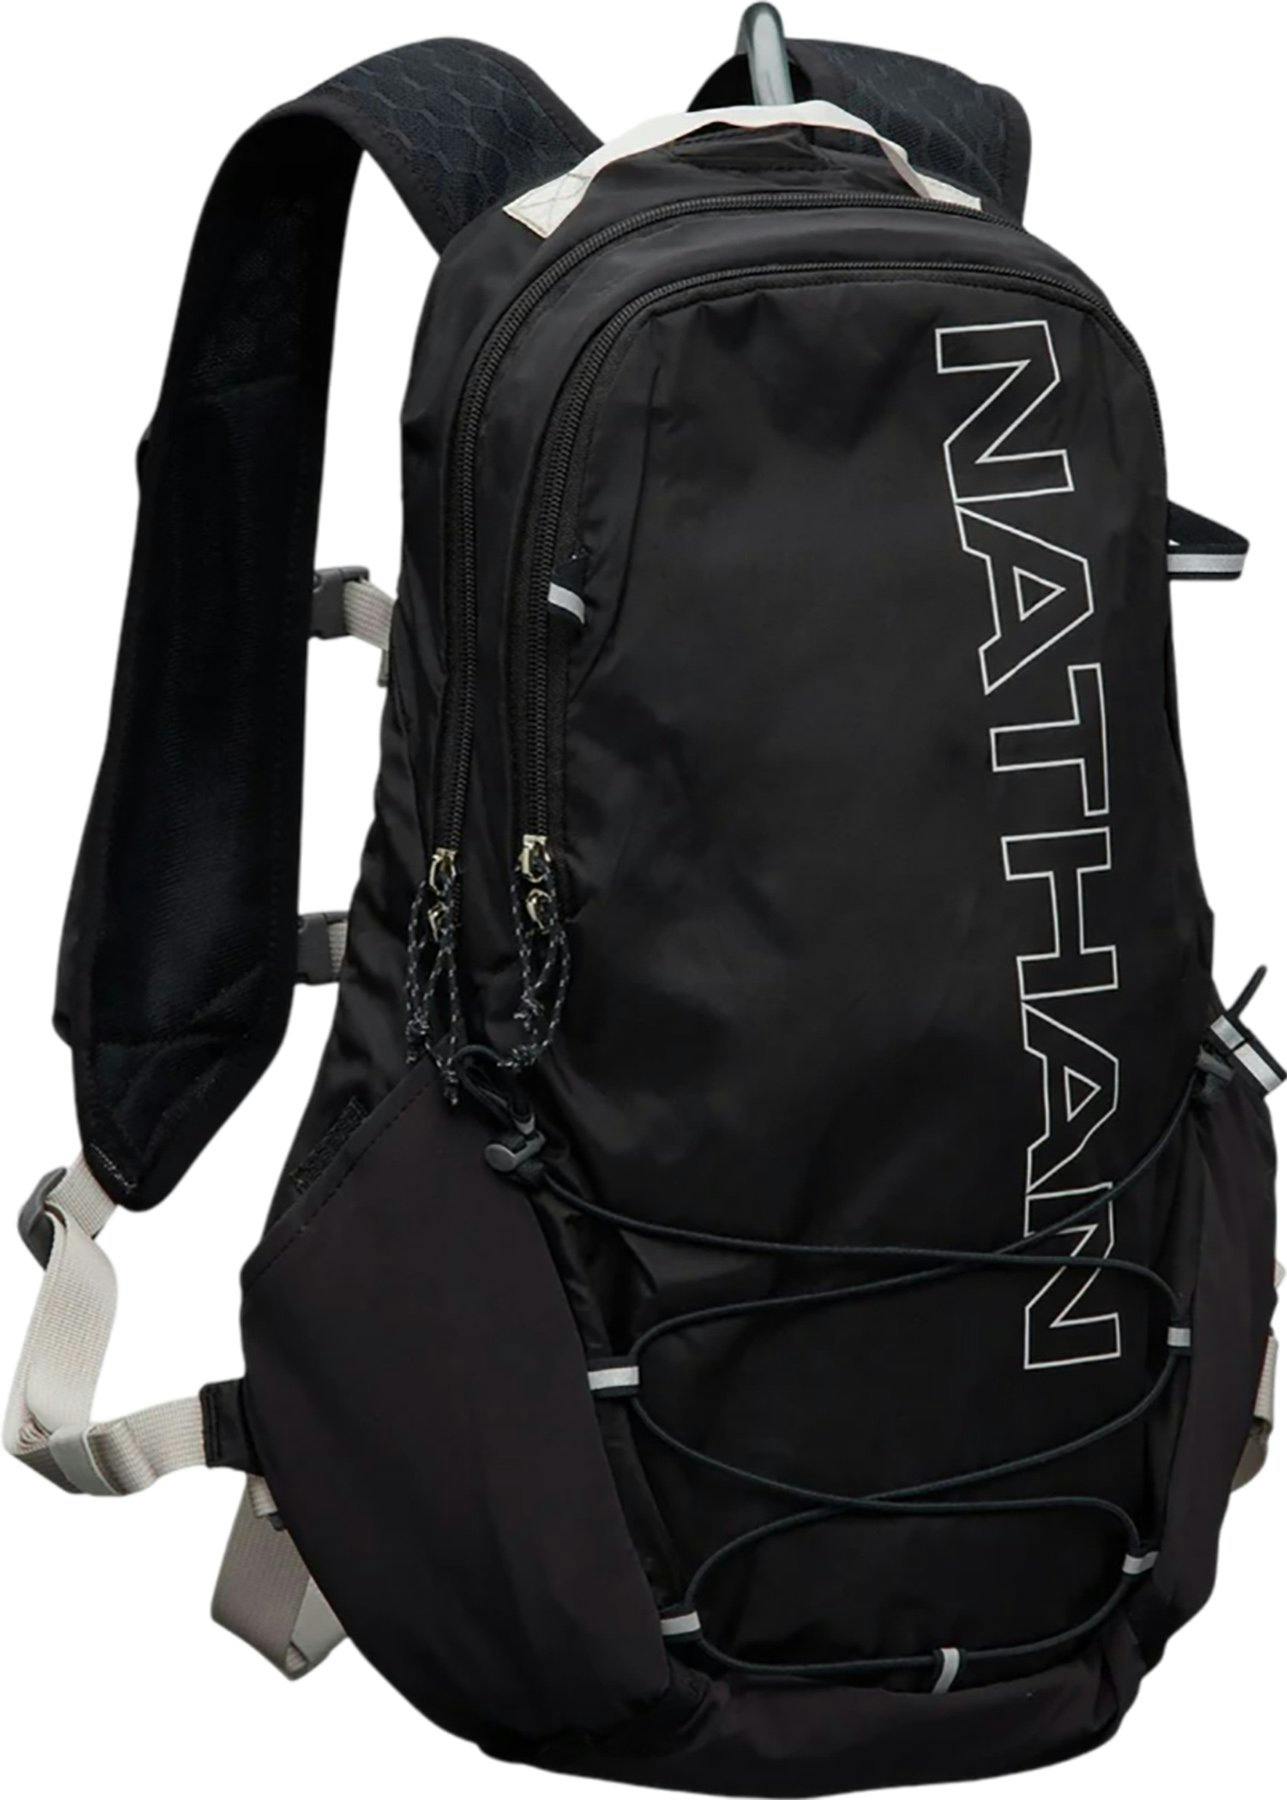 Product image for Crossover Hydration Pack 15L 